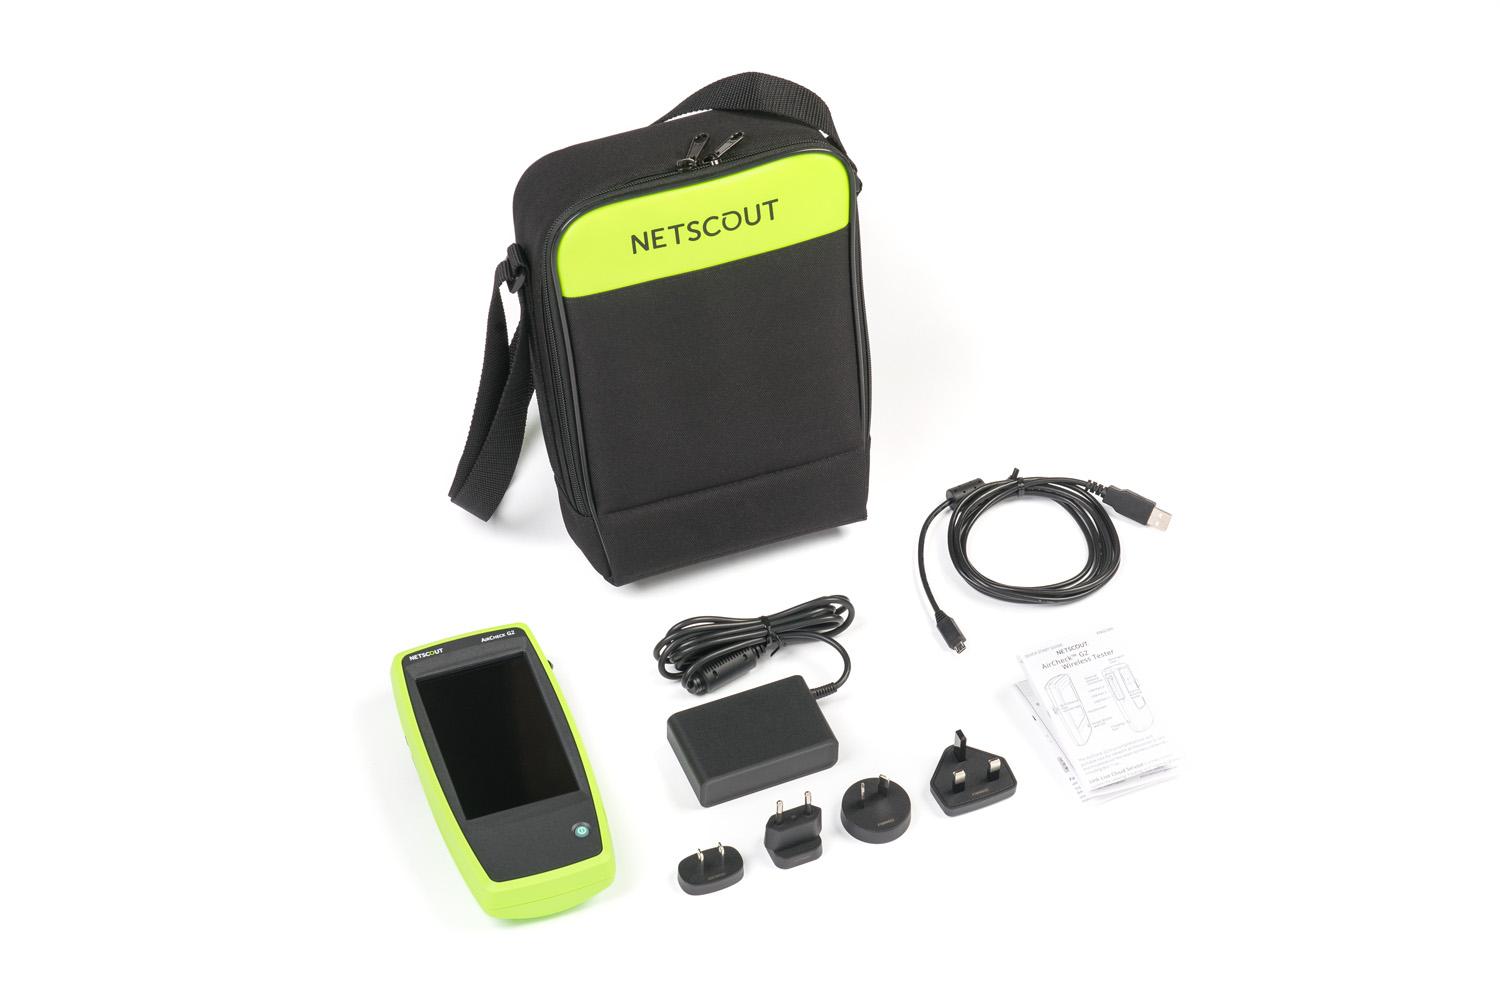 Hands On: NETSCOUT AirCheck G2